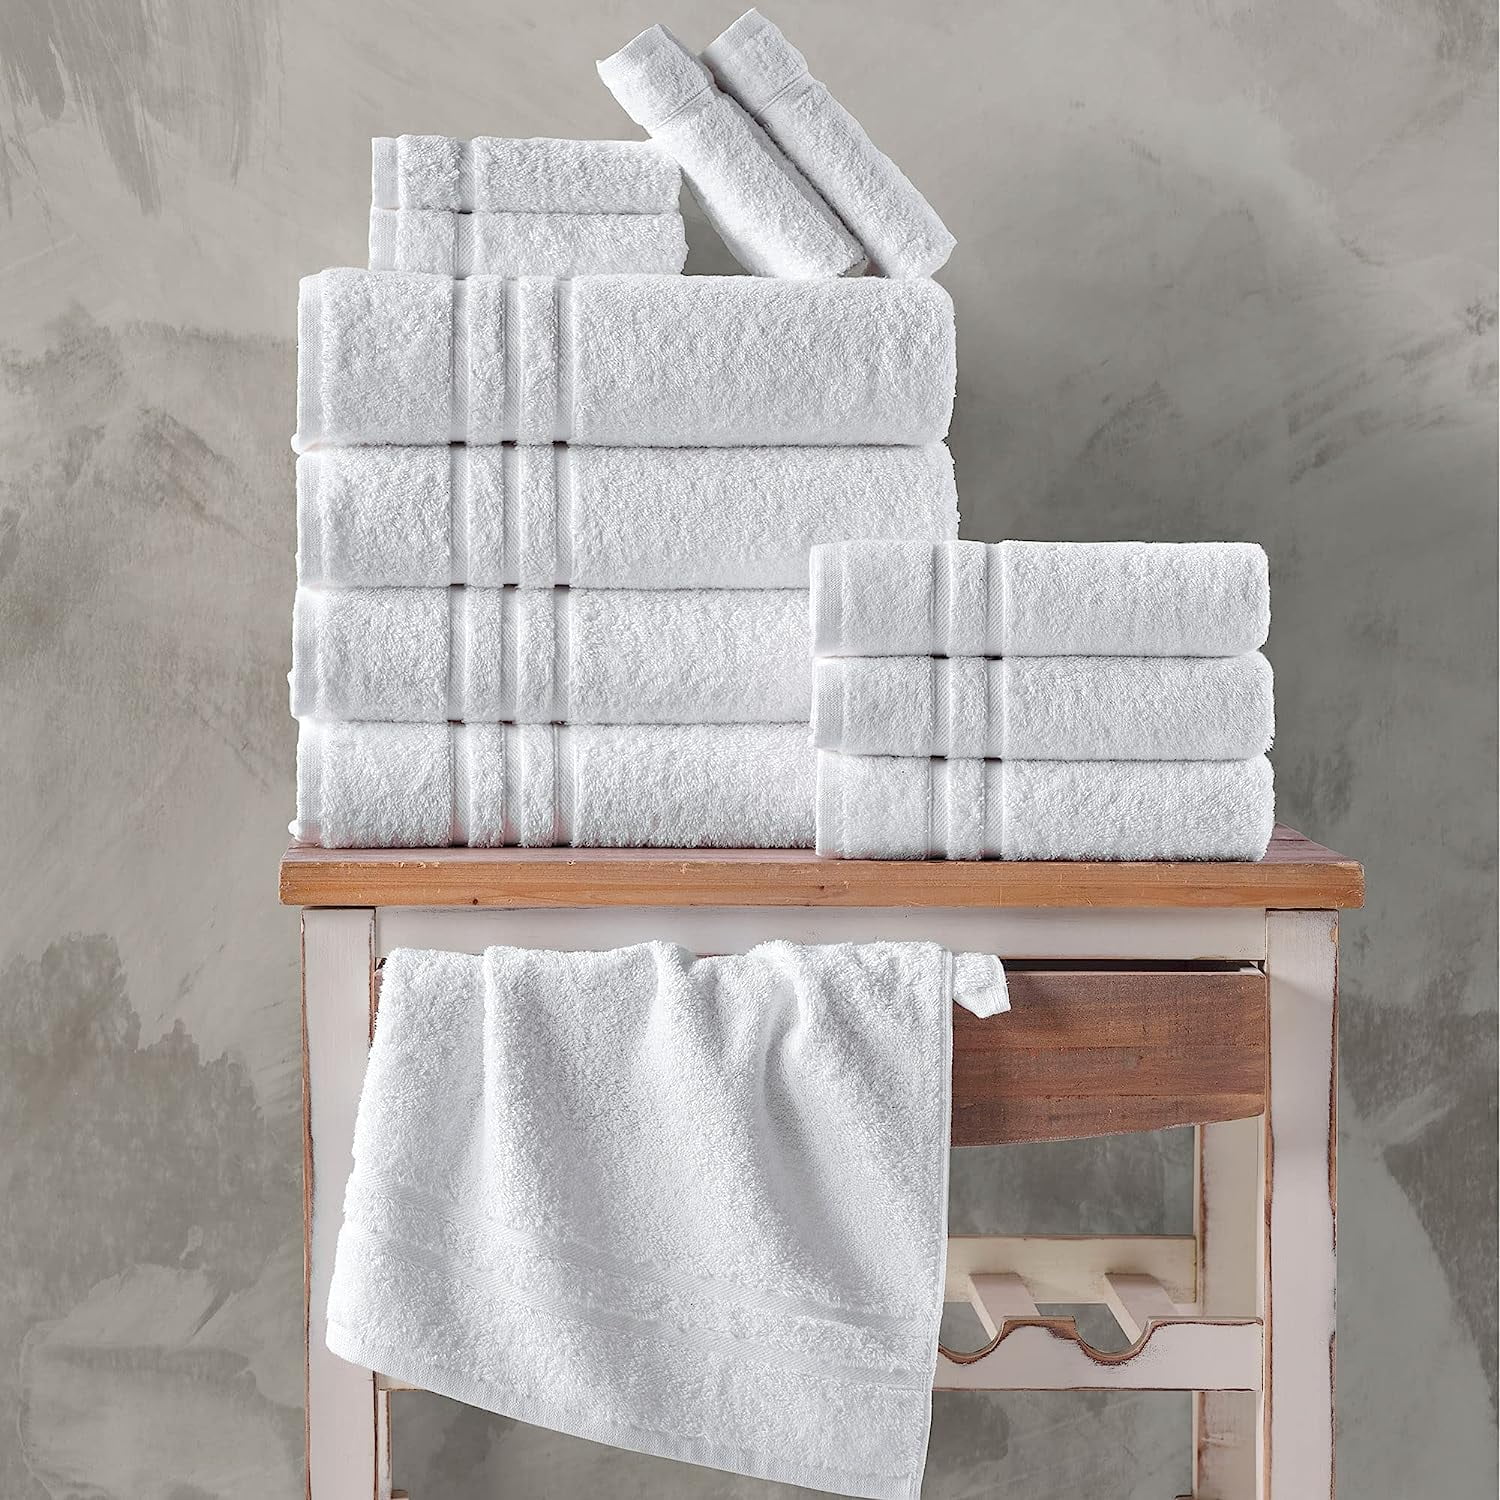 The Hammam Linen Bath Towel Set Is on Sale for Labor Day